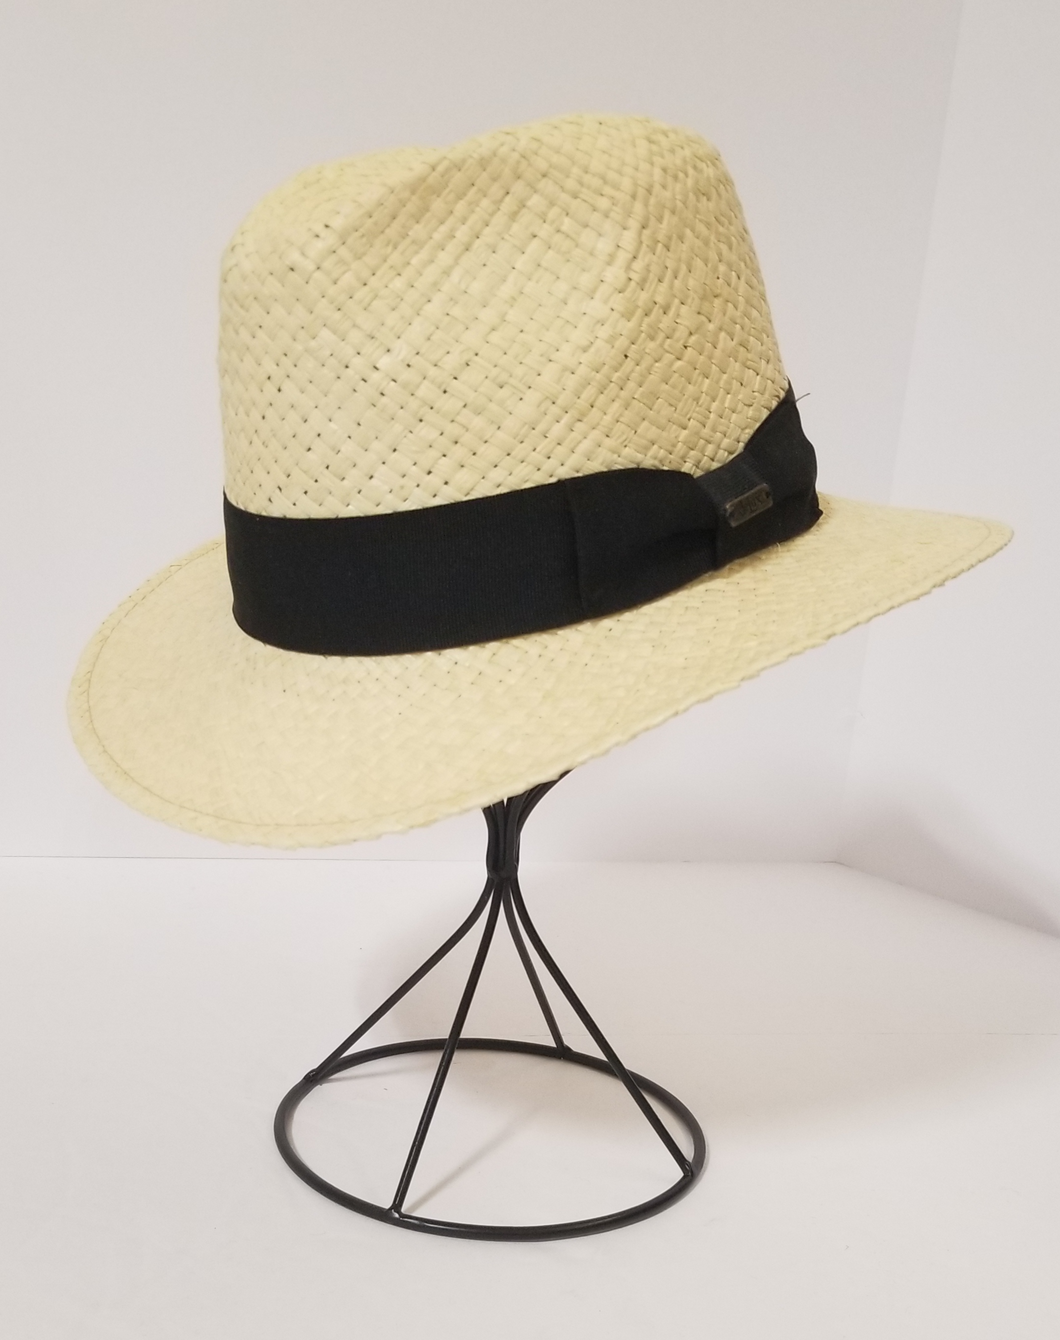 Straw Fedora Hat - The Mens Shoppe & Her Boutique